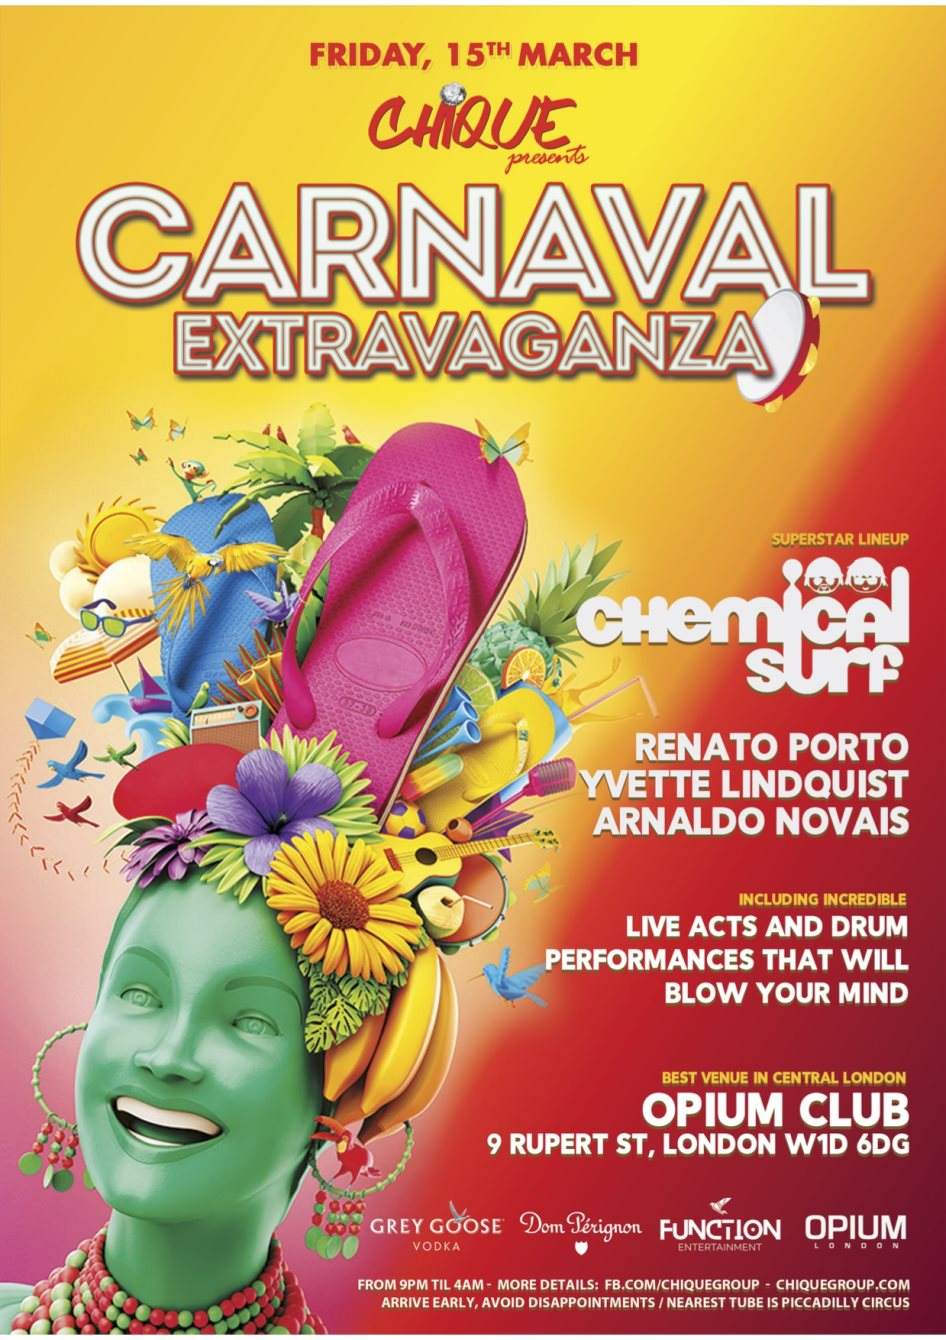 Chique - Carnaval Extravaganza/ Chemical Surf Long set - フライヤー表